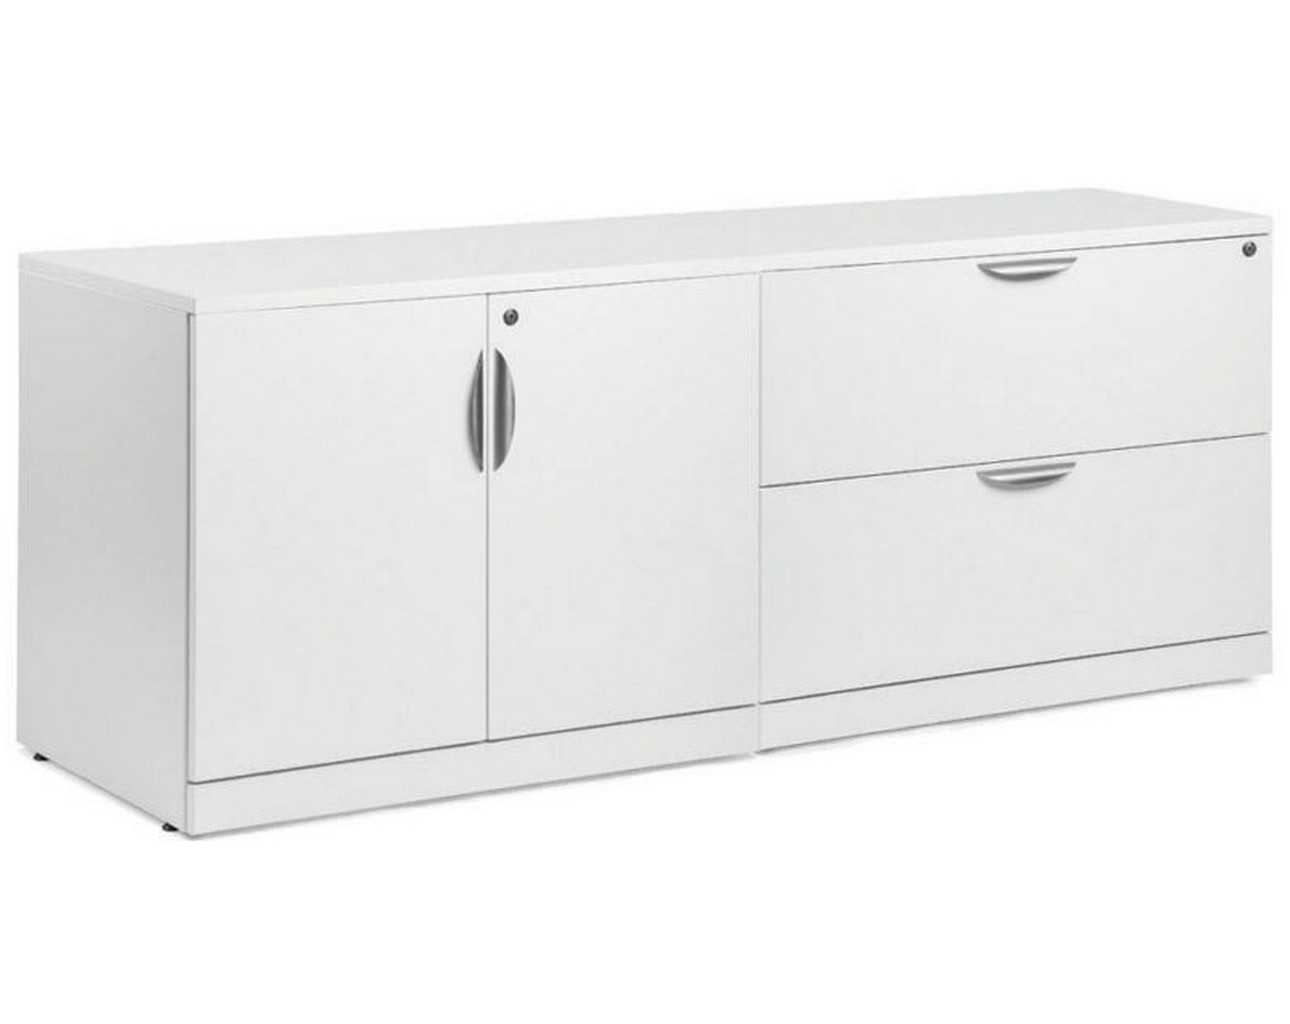 Lateral Storage Credenza – White Base and Top